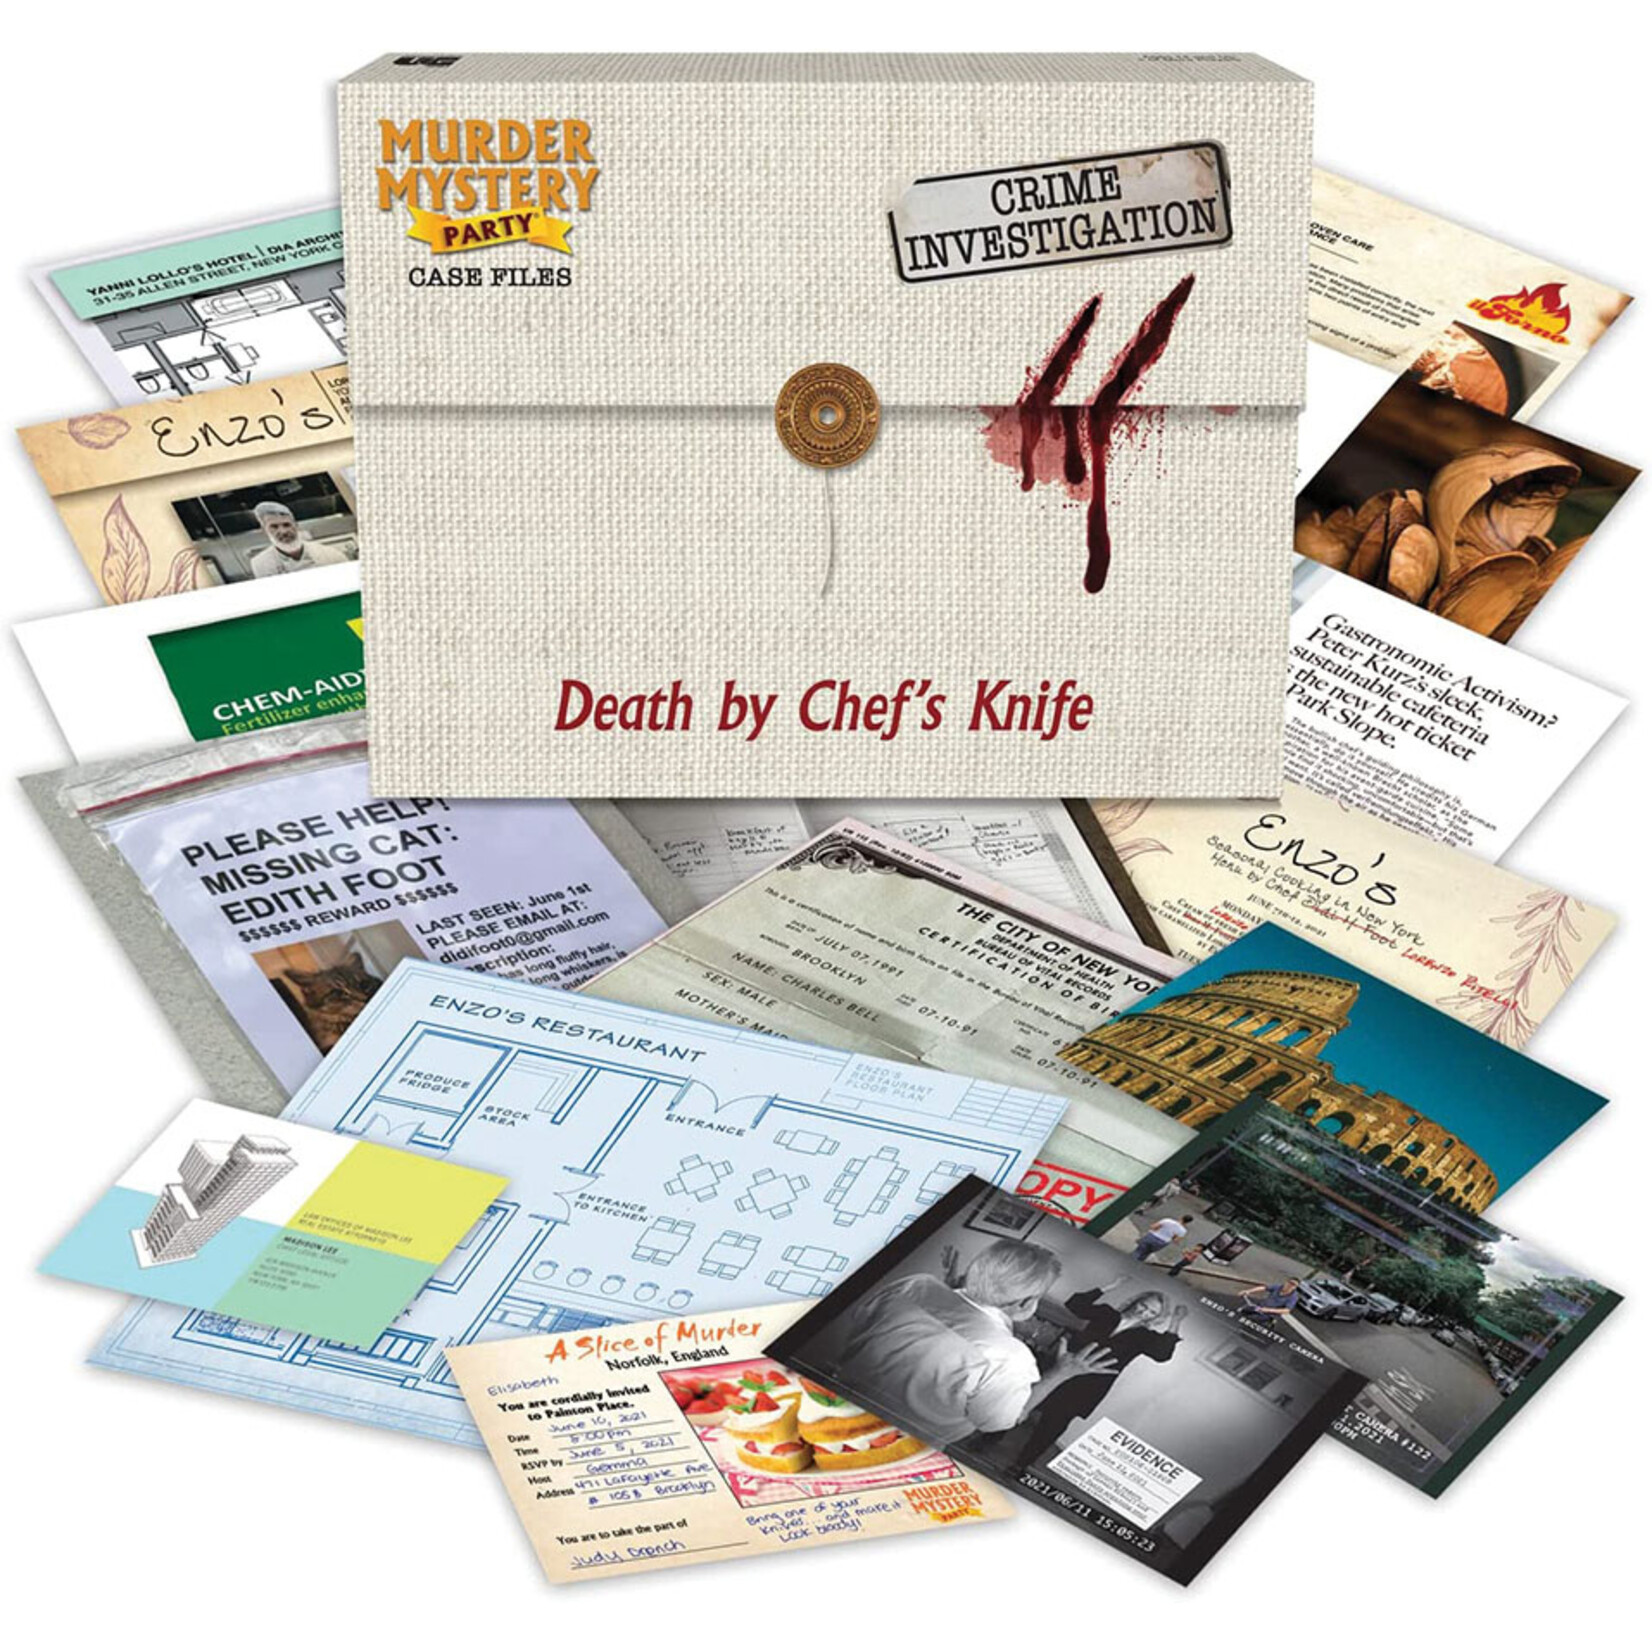 University Games Murder Mystery Party: Case Files - Death by Chef's Knife